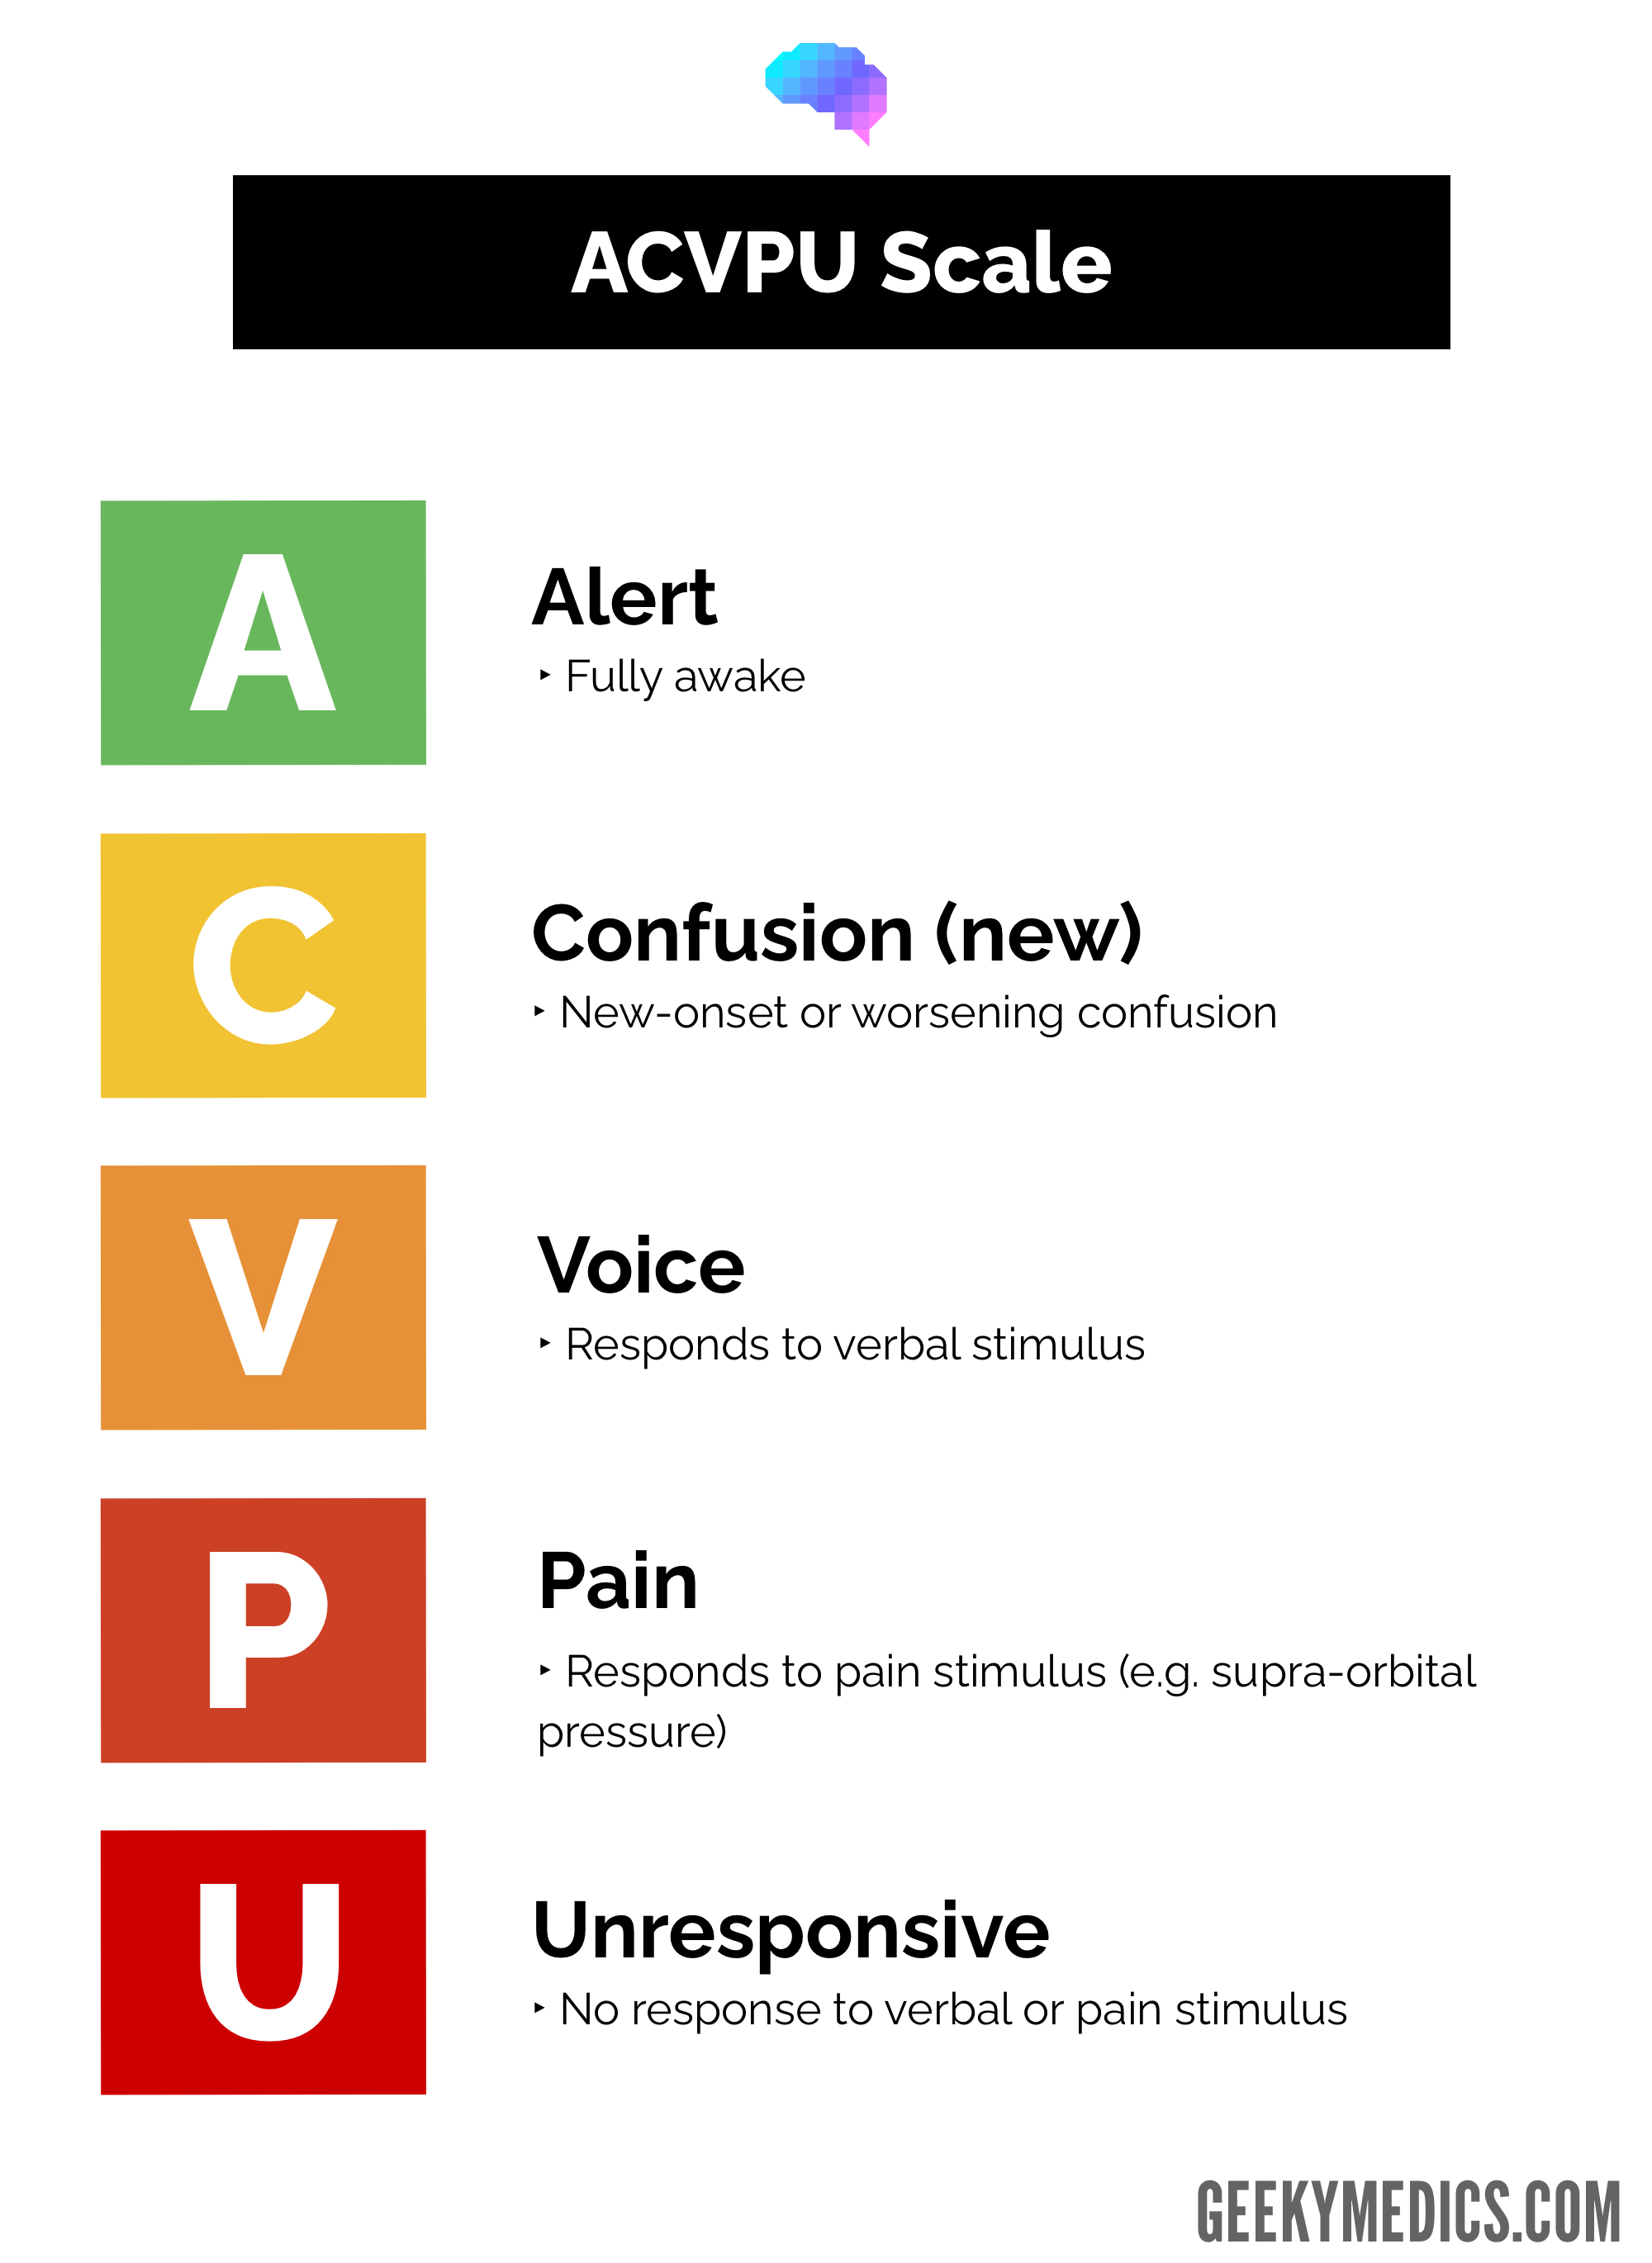 The ACVPU scale for assessing level of consciousness